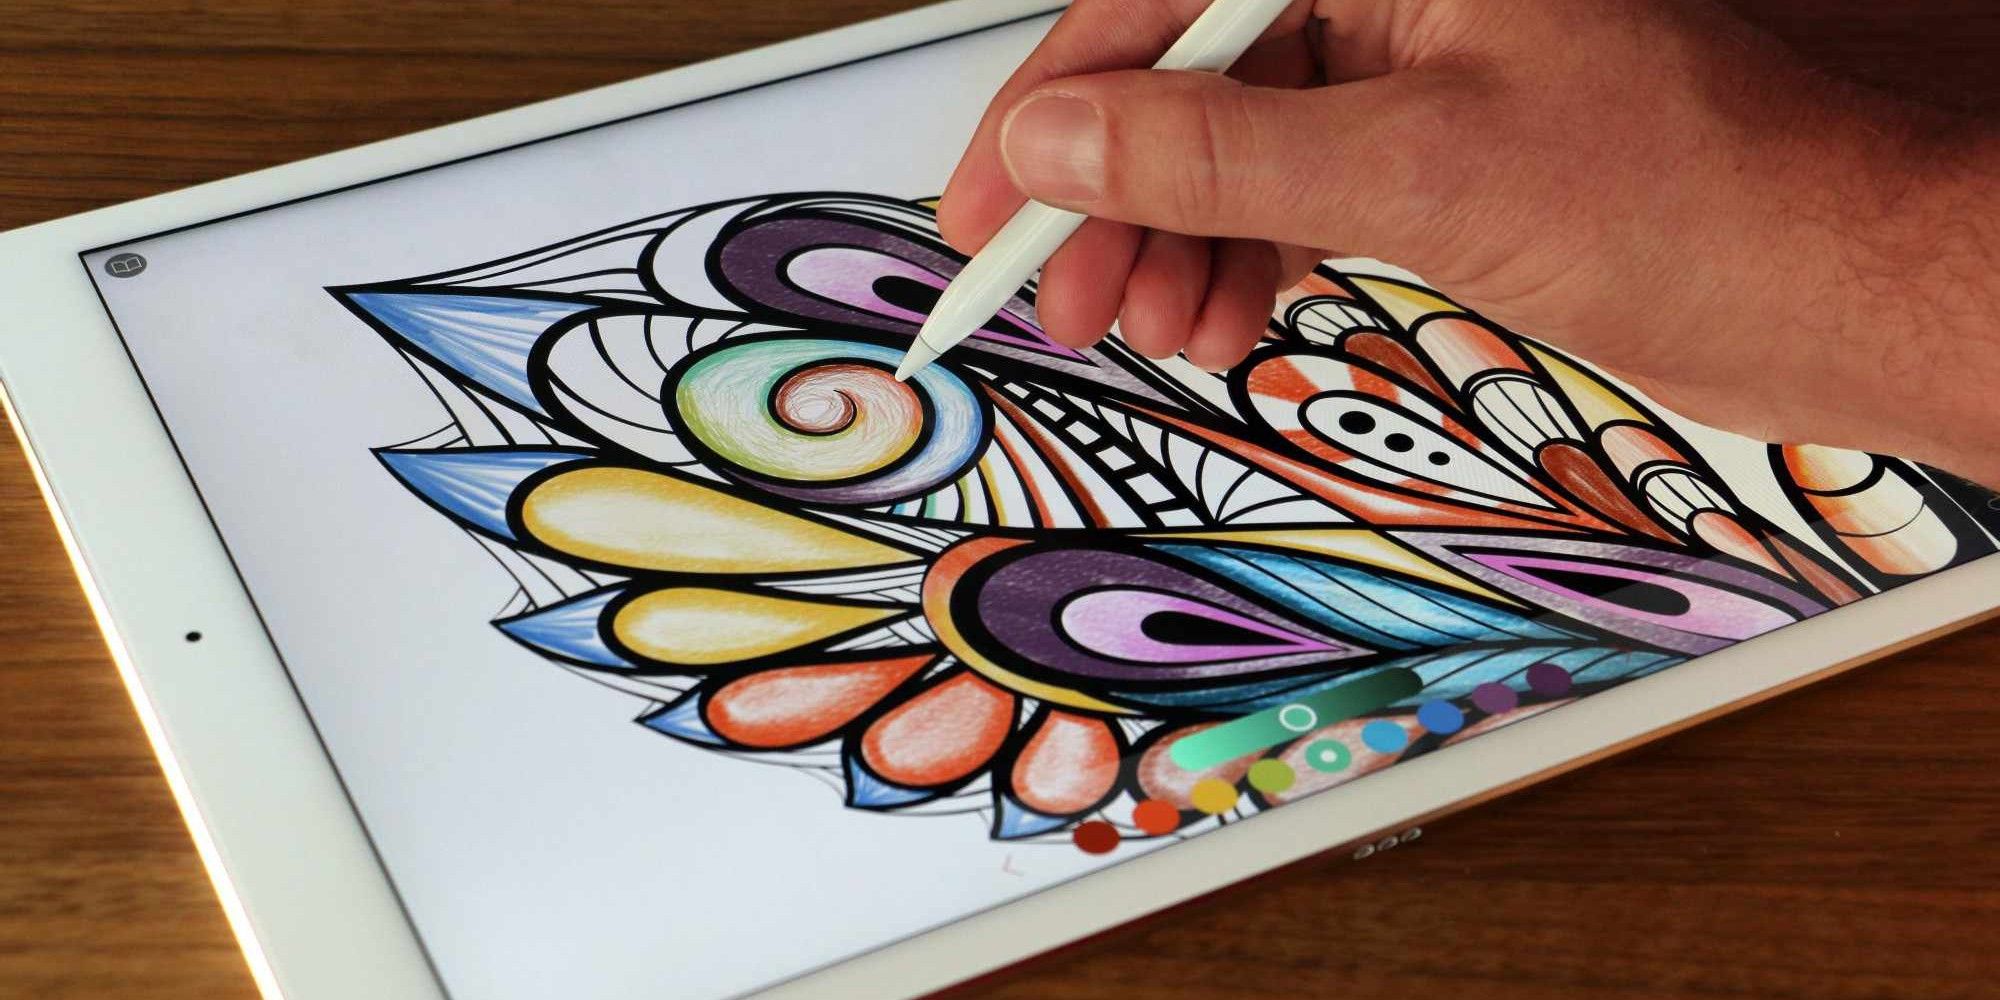 New iPad Pro Models Reportedly Coming In April: Here’s What To Expect